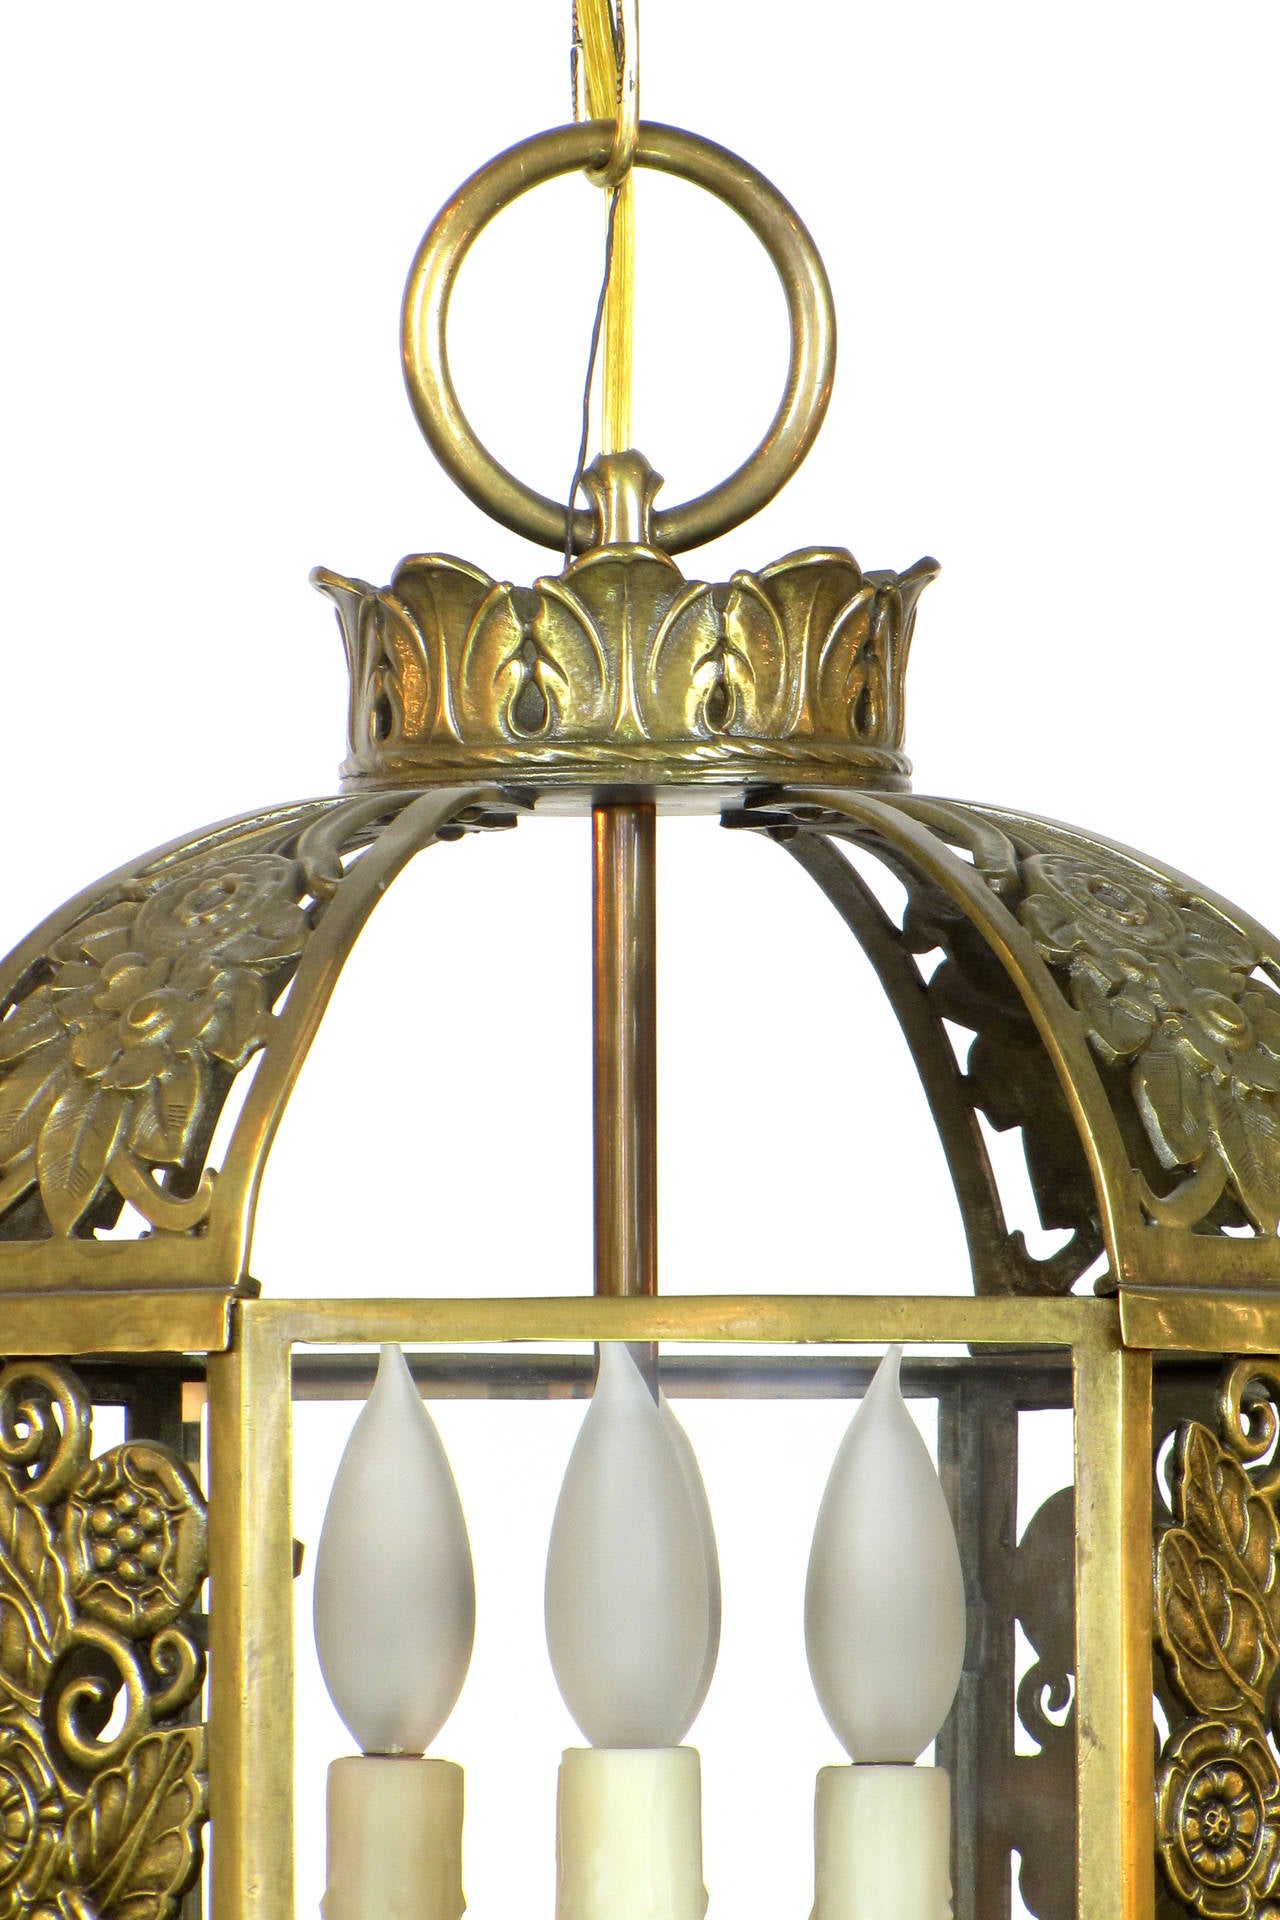 Brass and Glass Lantern with Cast Brass Floral designs and Frosted Cut Glass on bottom.  Newly restored and rewired.  UL Listing upon request.  Four light cluster gives quite a lot of light for an entry way.